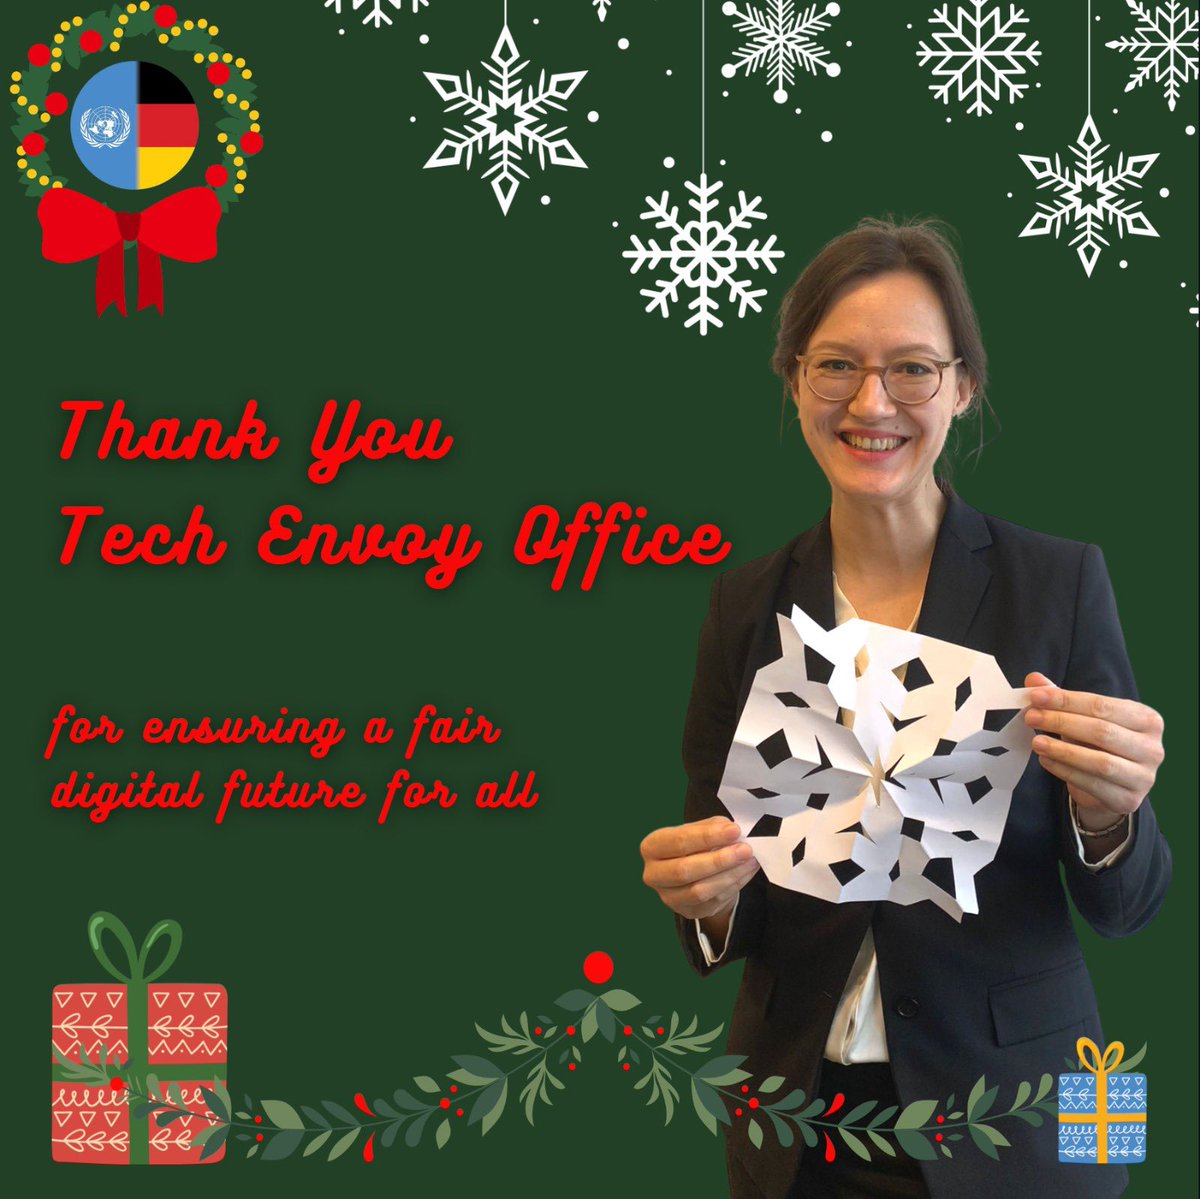 “I dedicate my ❄️ to the @UNTechEnvoy Office led by USG Amandeep Gill for their continuous efforts to enable an open, free, inclusive and secure digital future for all.” Olga, Digital Policies, @GermanyUN #GlobalDigitalCompact #HolidaysCountdown